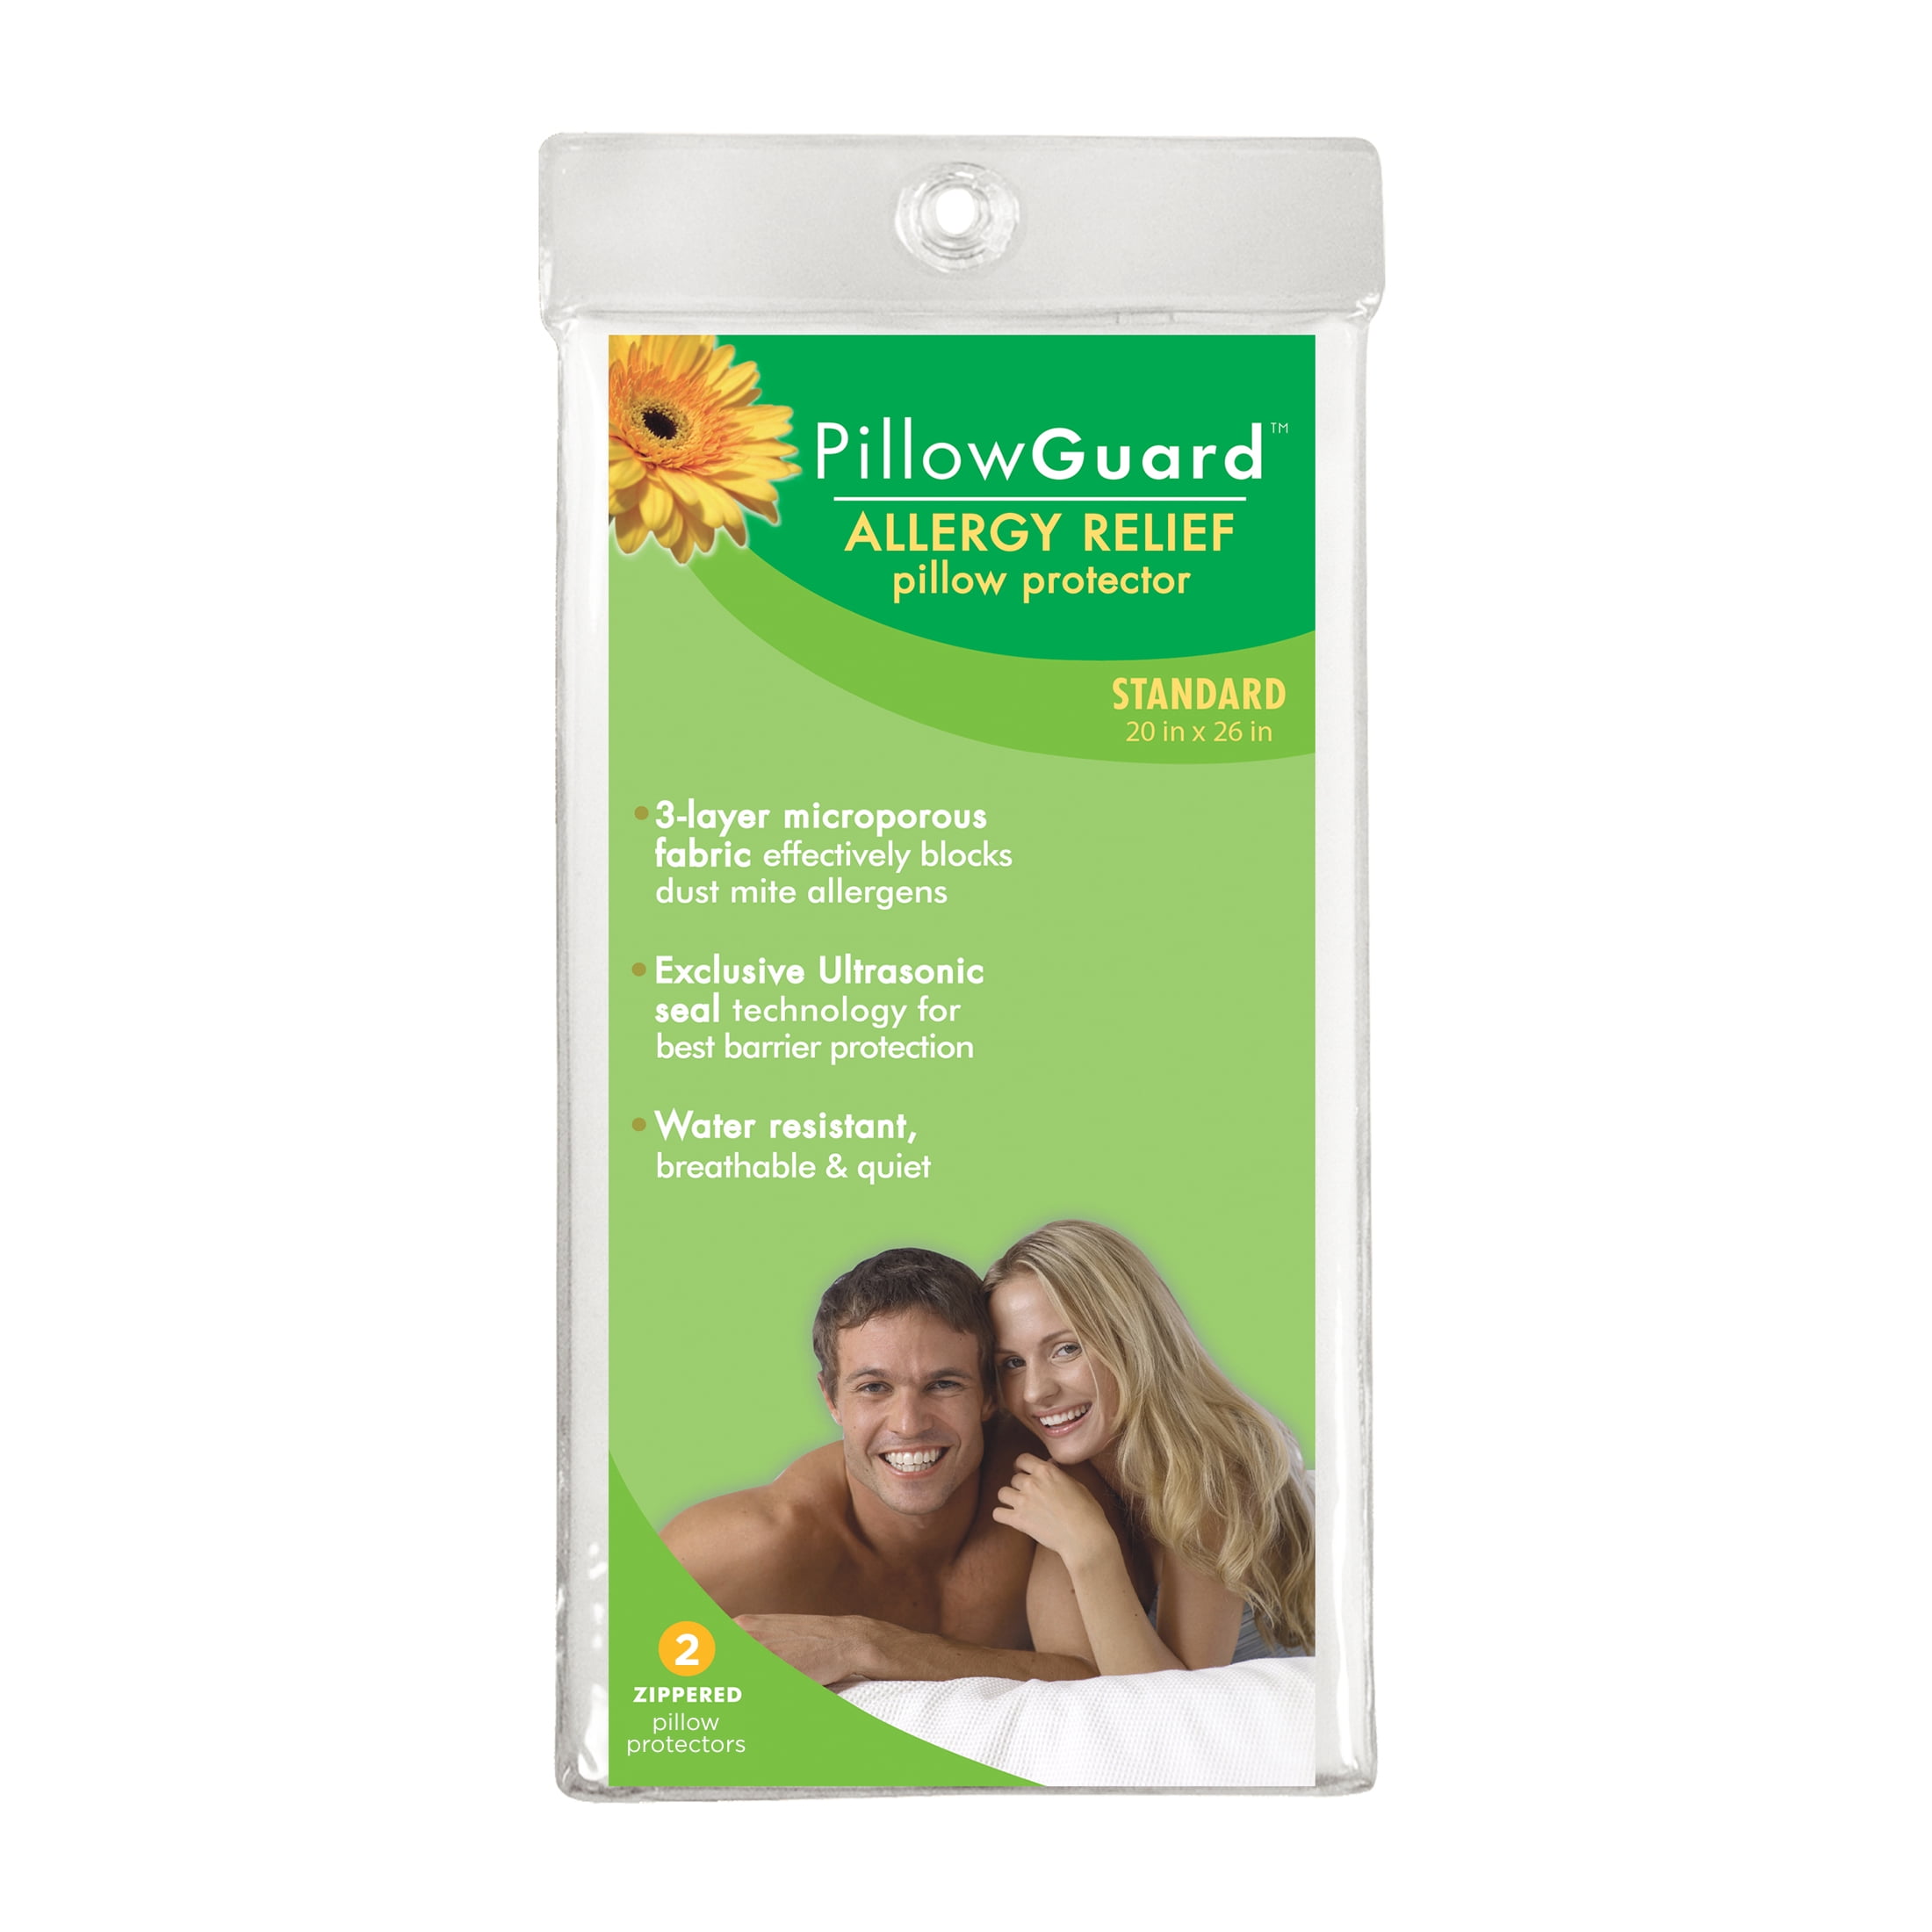 Pillow Guard Allergy Relief Water Resistant Zippered Pillow Protectors, Standard, 2 Pack